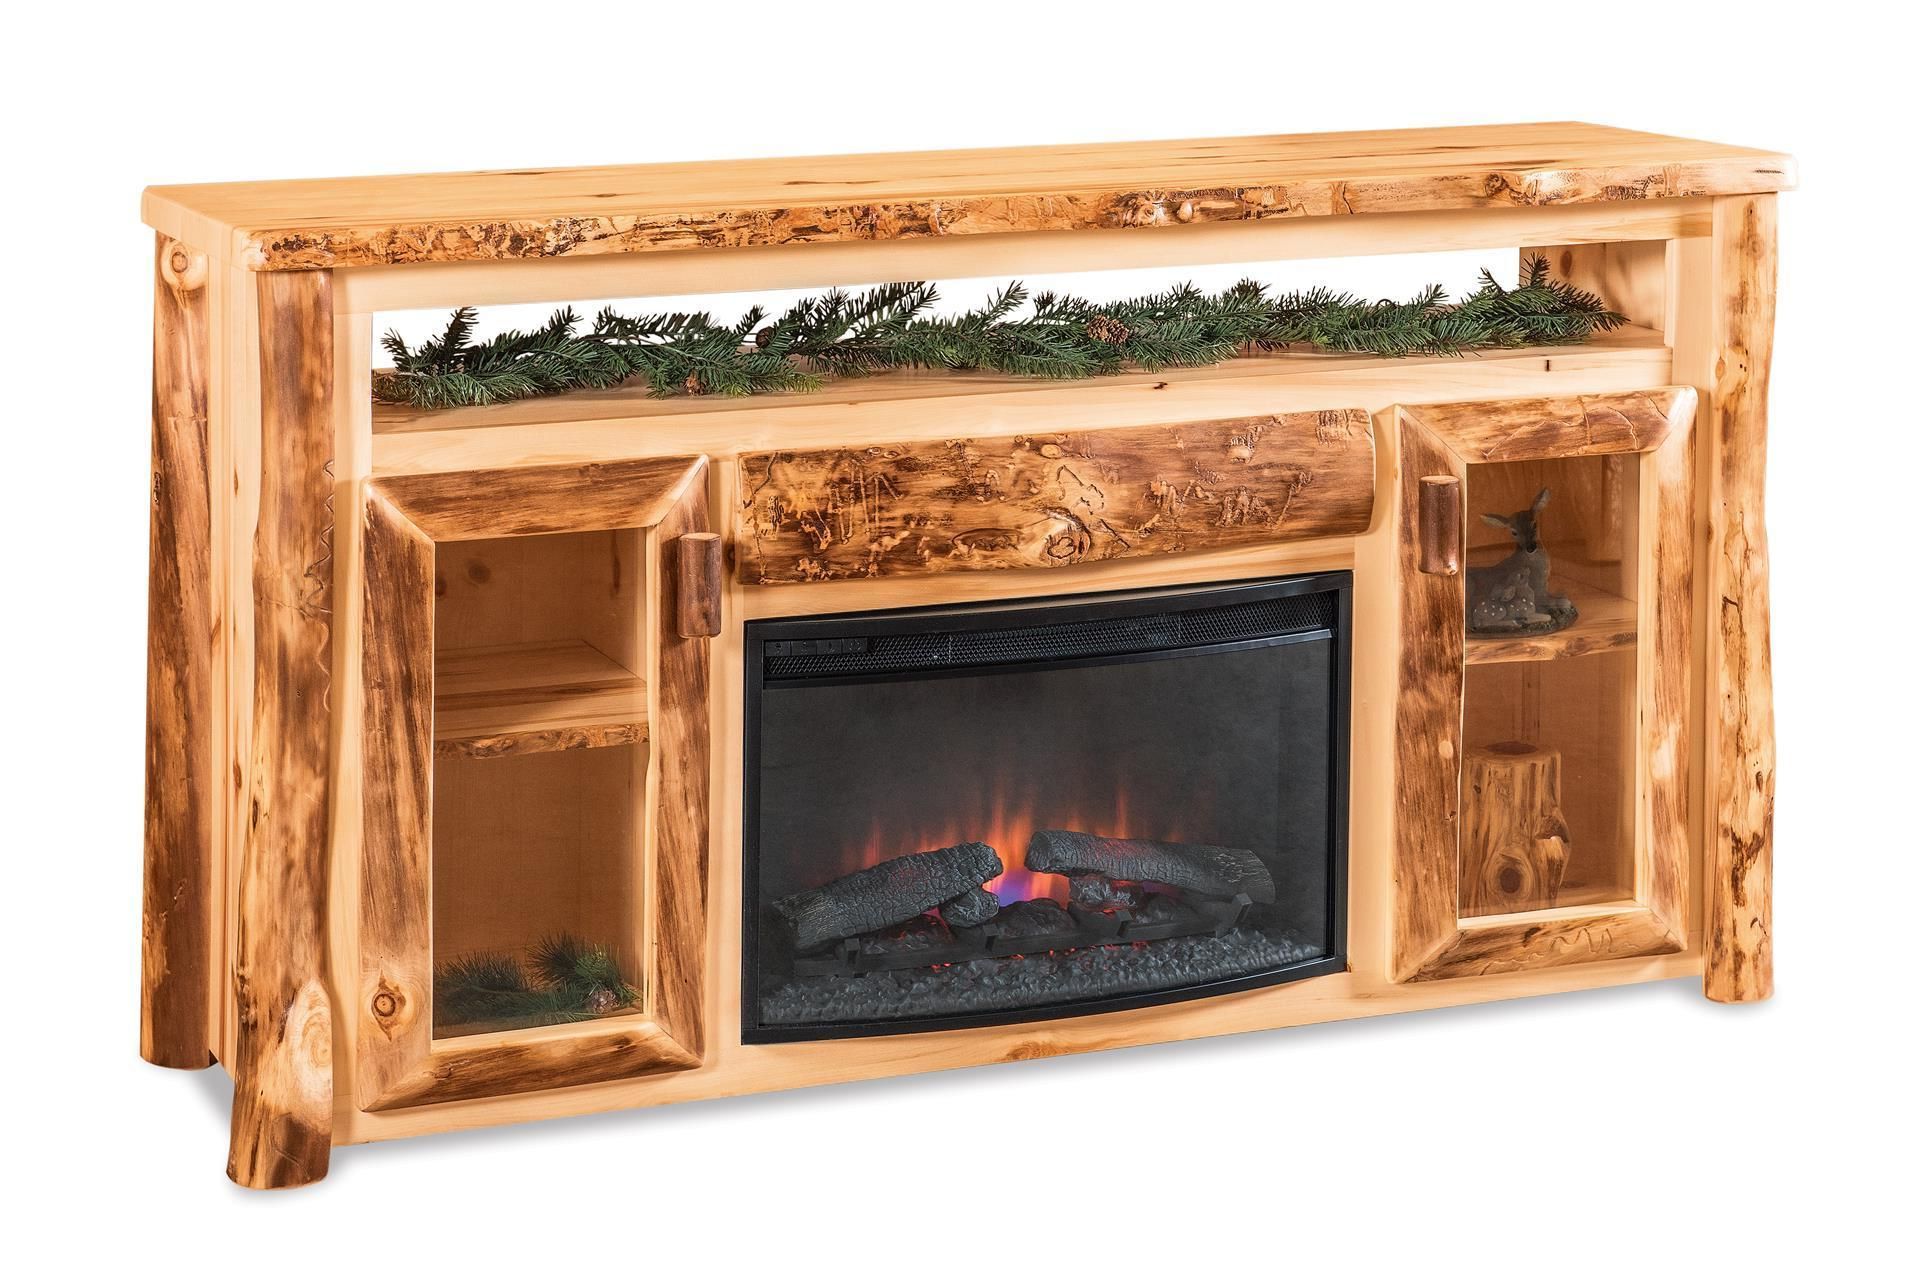 Rustic Log Tv Cabinet With Electric Fireplace From Dutchcrafters With Regard To Tv Stands With Electric Fireplace (View 17 of 20)